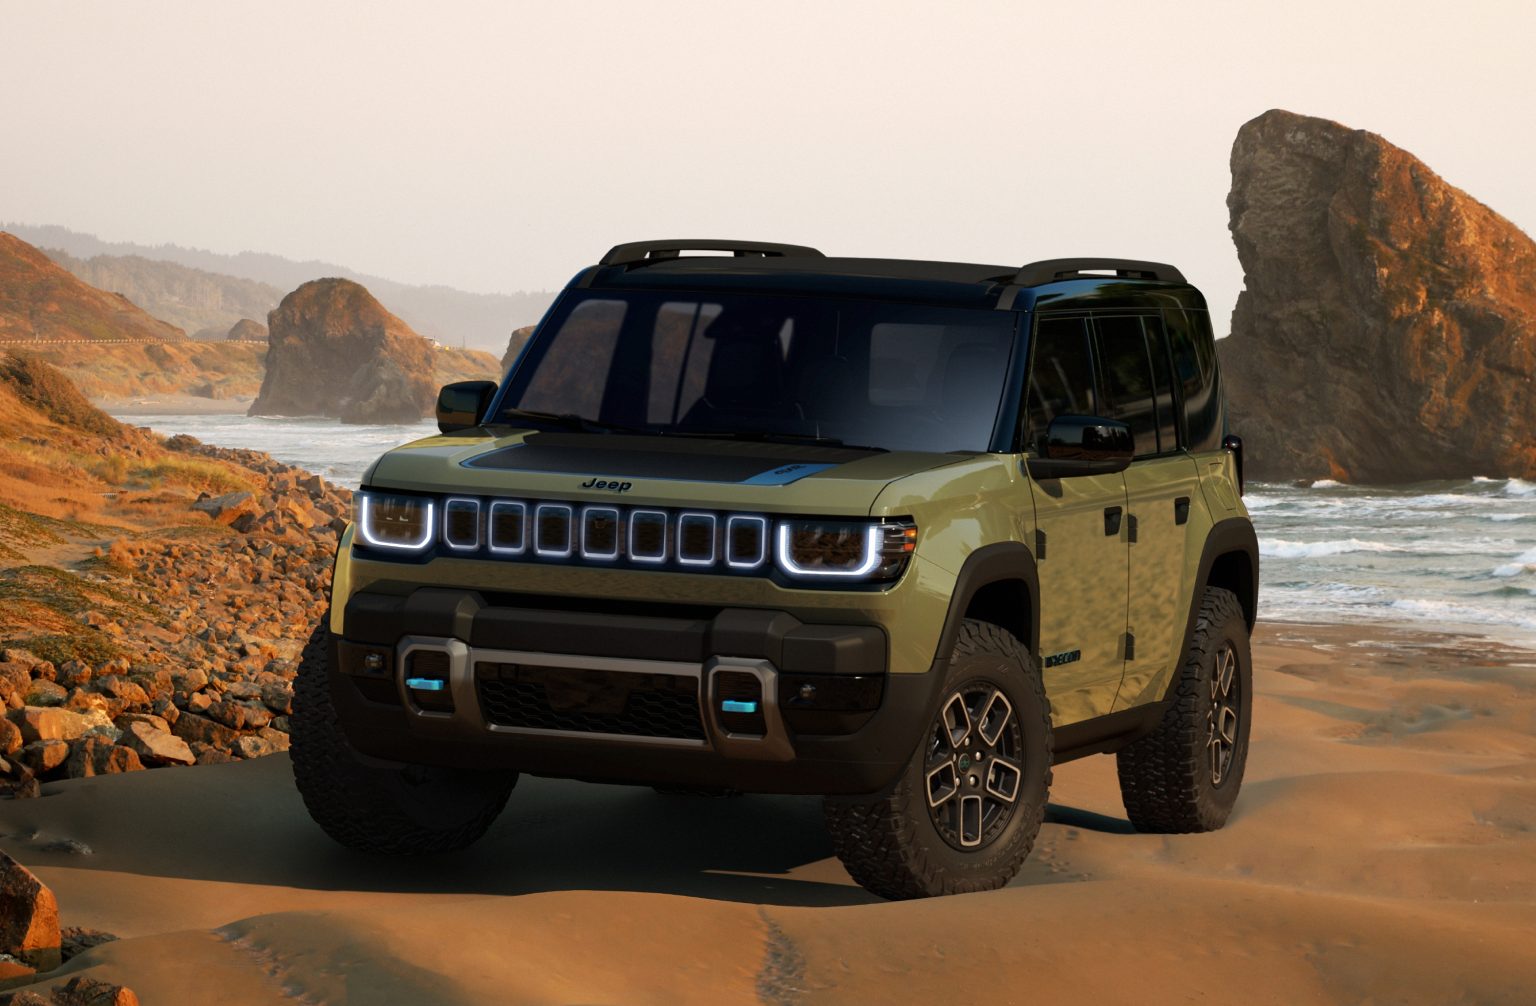 Jeep Shows Off AllElectric Jeep Recon 4xe OffRoader That's Set for